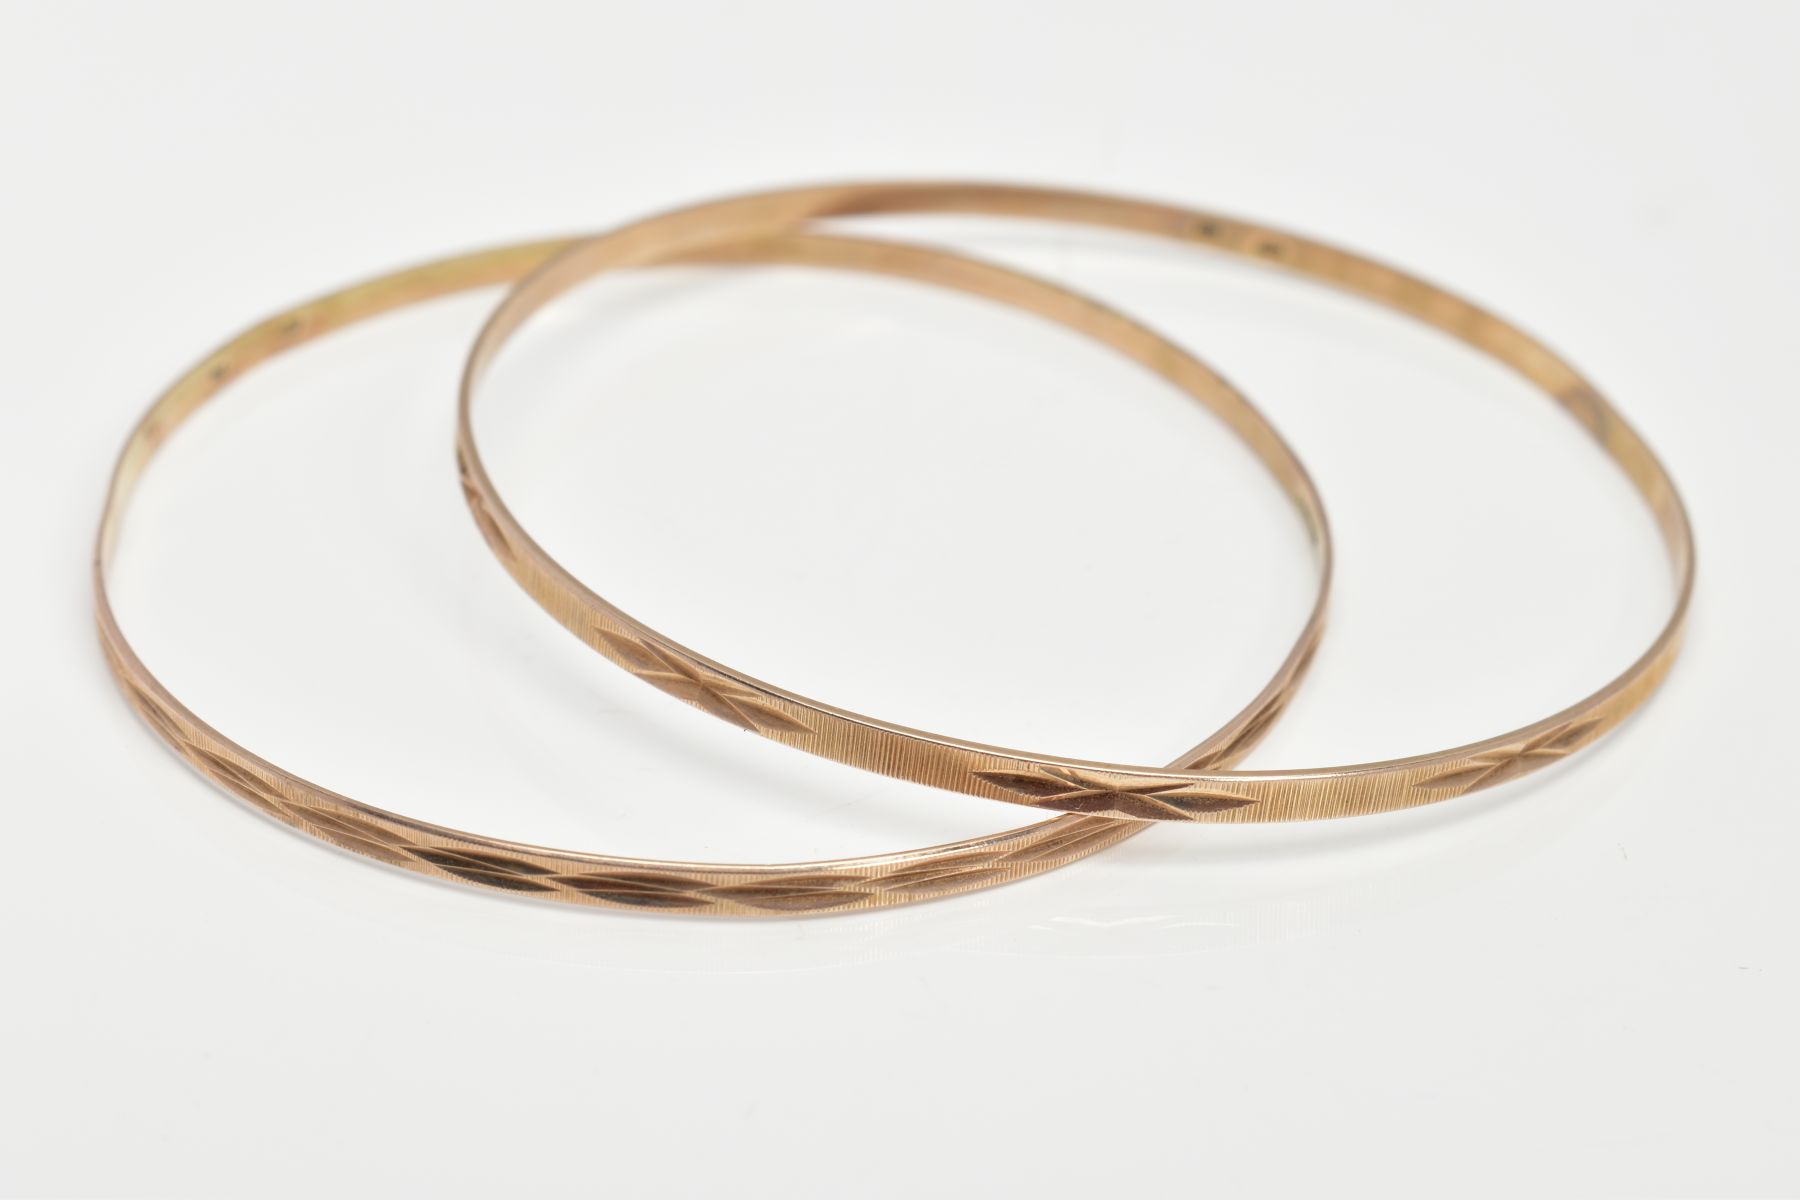 TWO 9CT GOLD THIN STACKING BANGLES, textured pattern, each hallmarked 9ct gold London import,